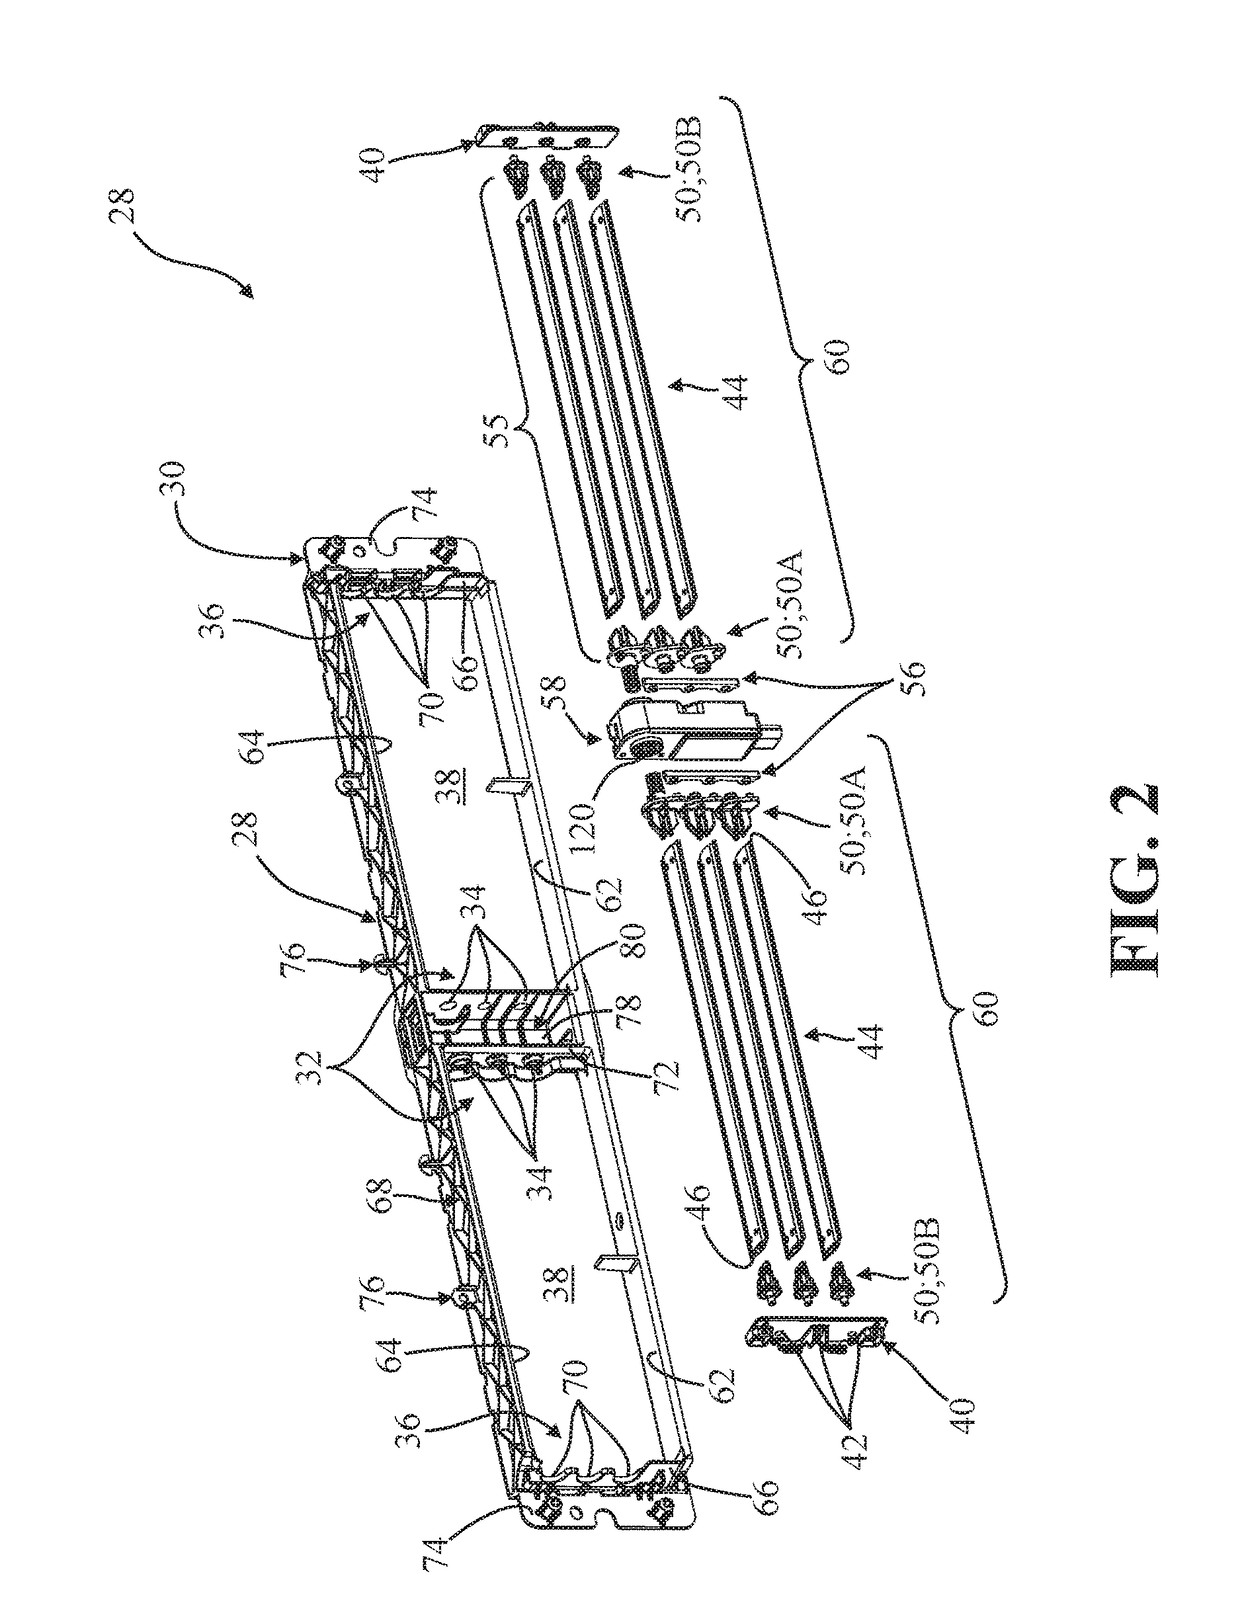 Active grille shutter and shutter subassembly for use with active grill shutters